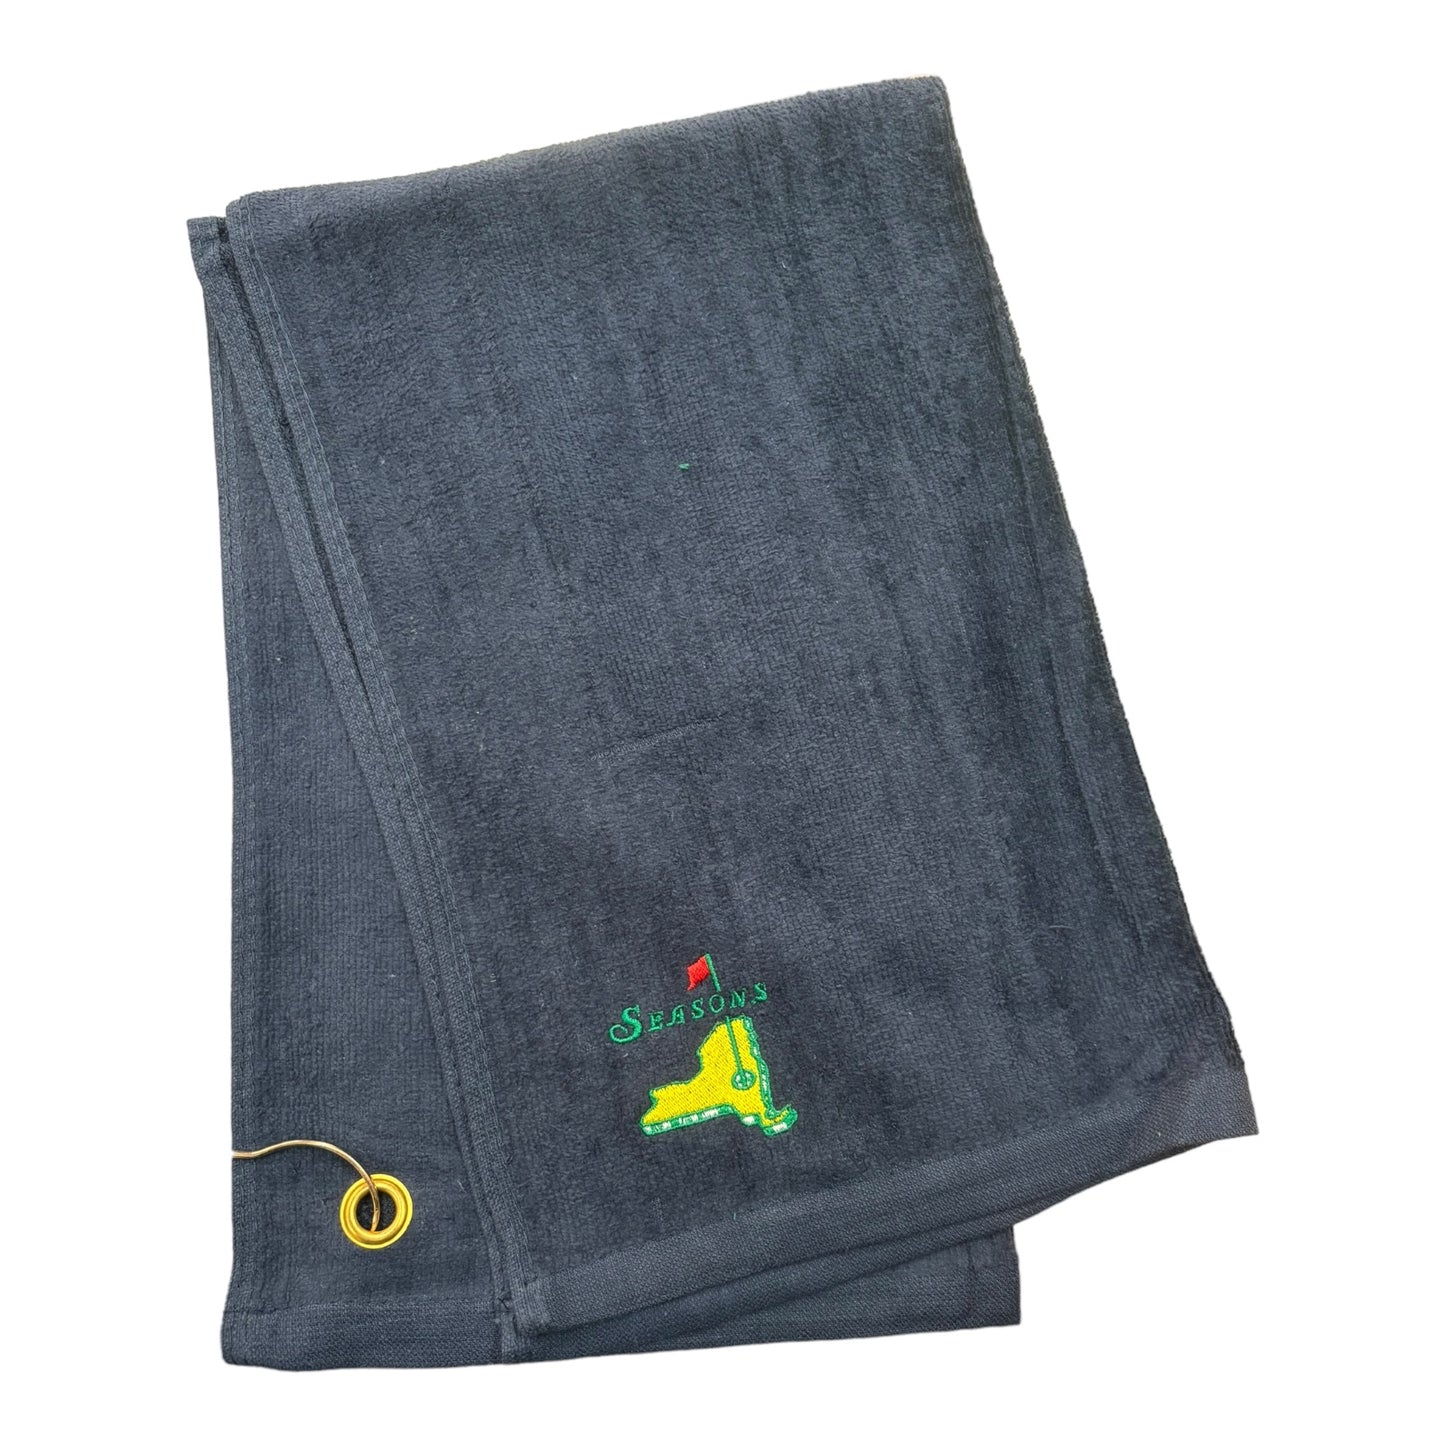 Navy Golf Towel with Embroidered NYS Logo Embroidered on it.